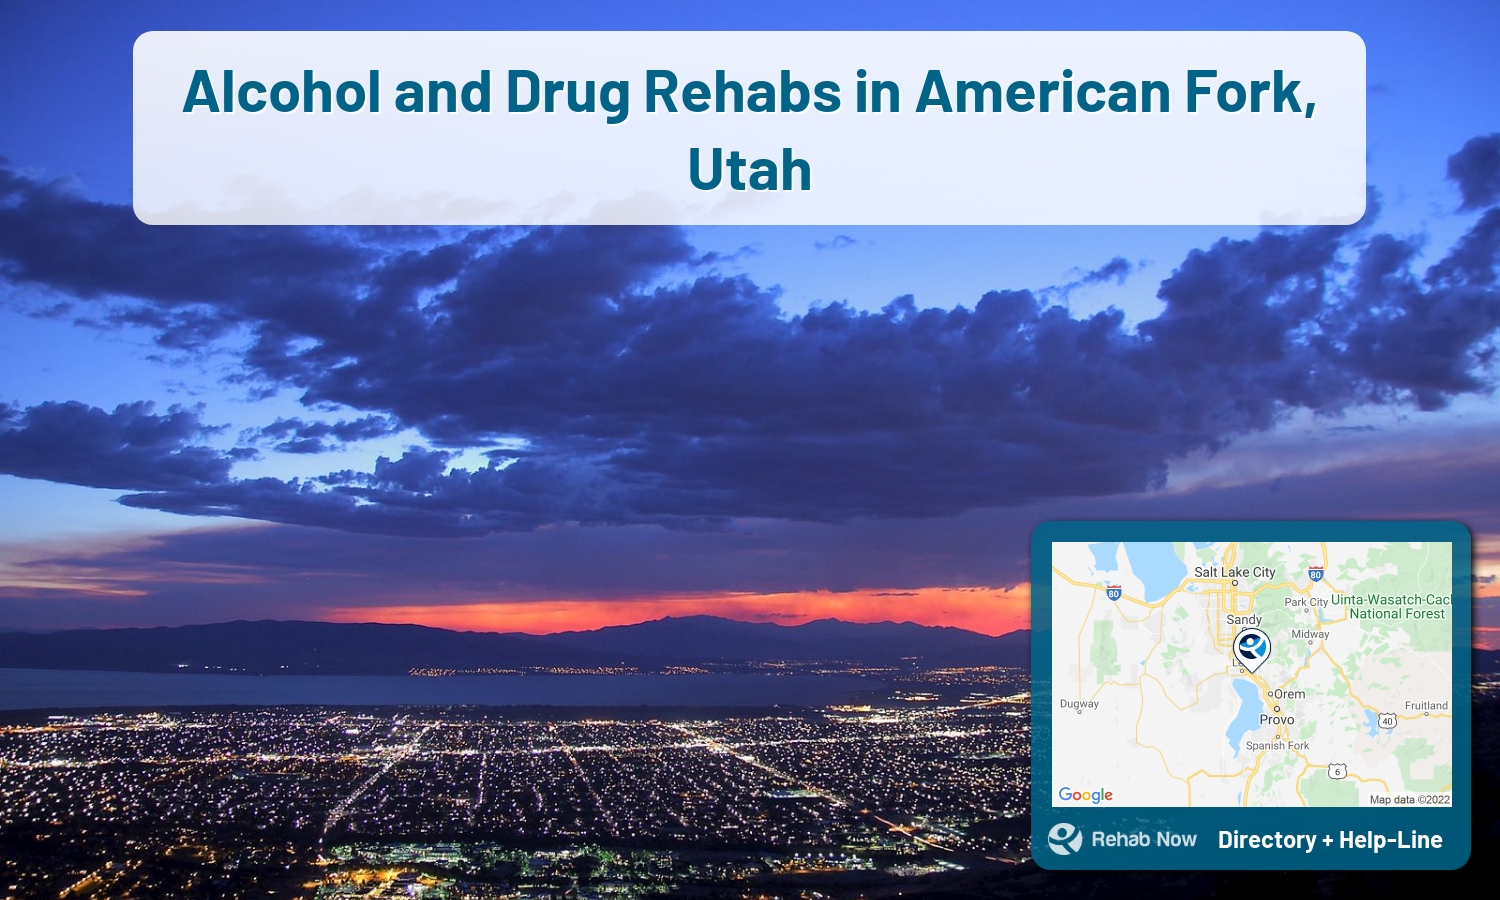 American Fork, UT Treatment Centers. Find drug rehab in American Fork, Utah, or detox and treatment programs. Get the right help now!